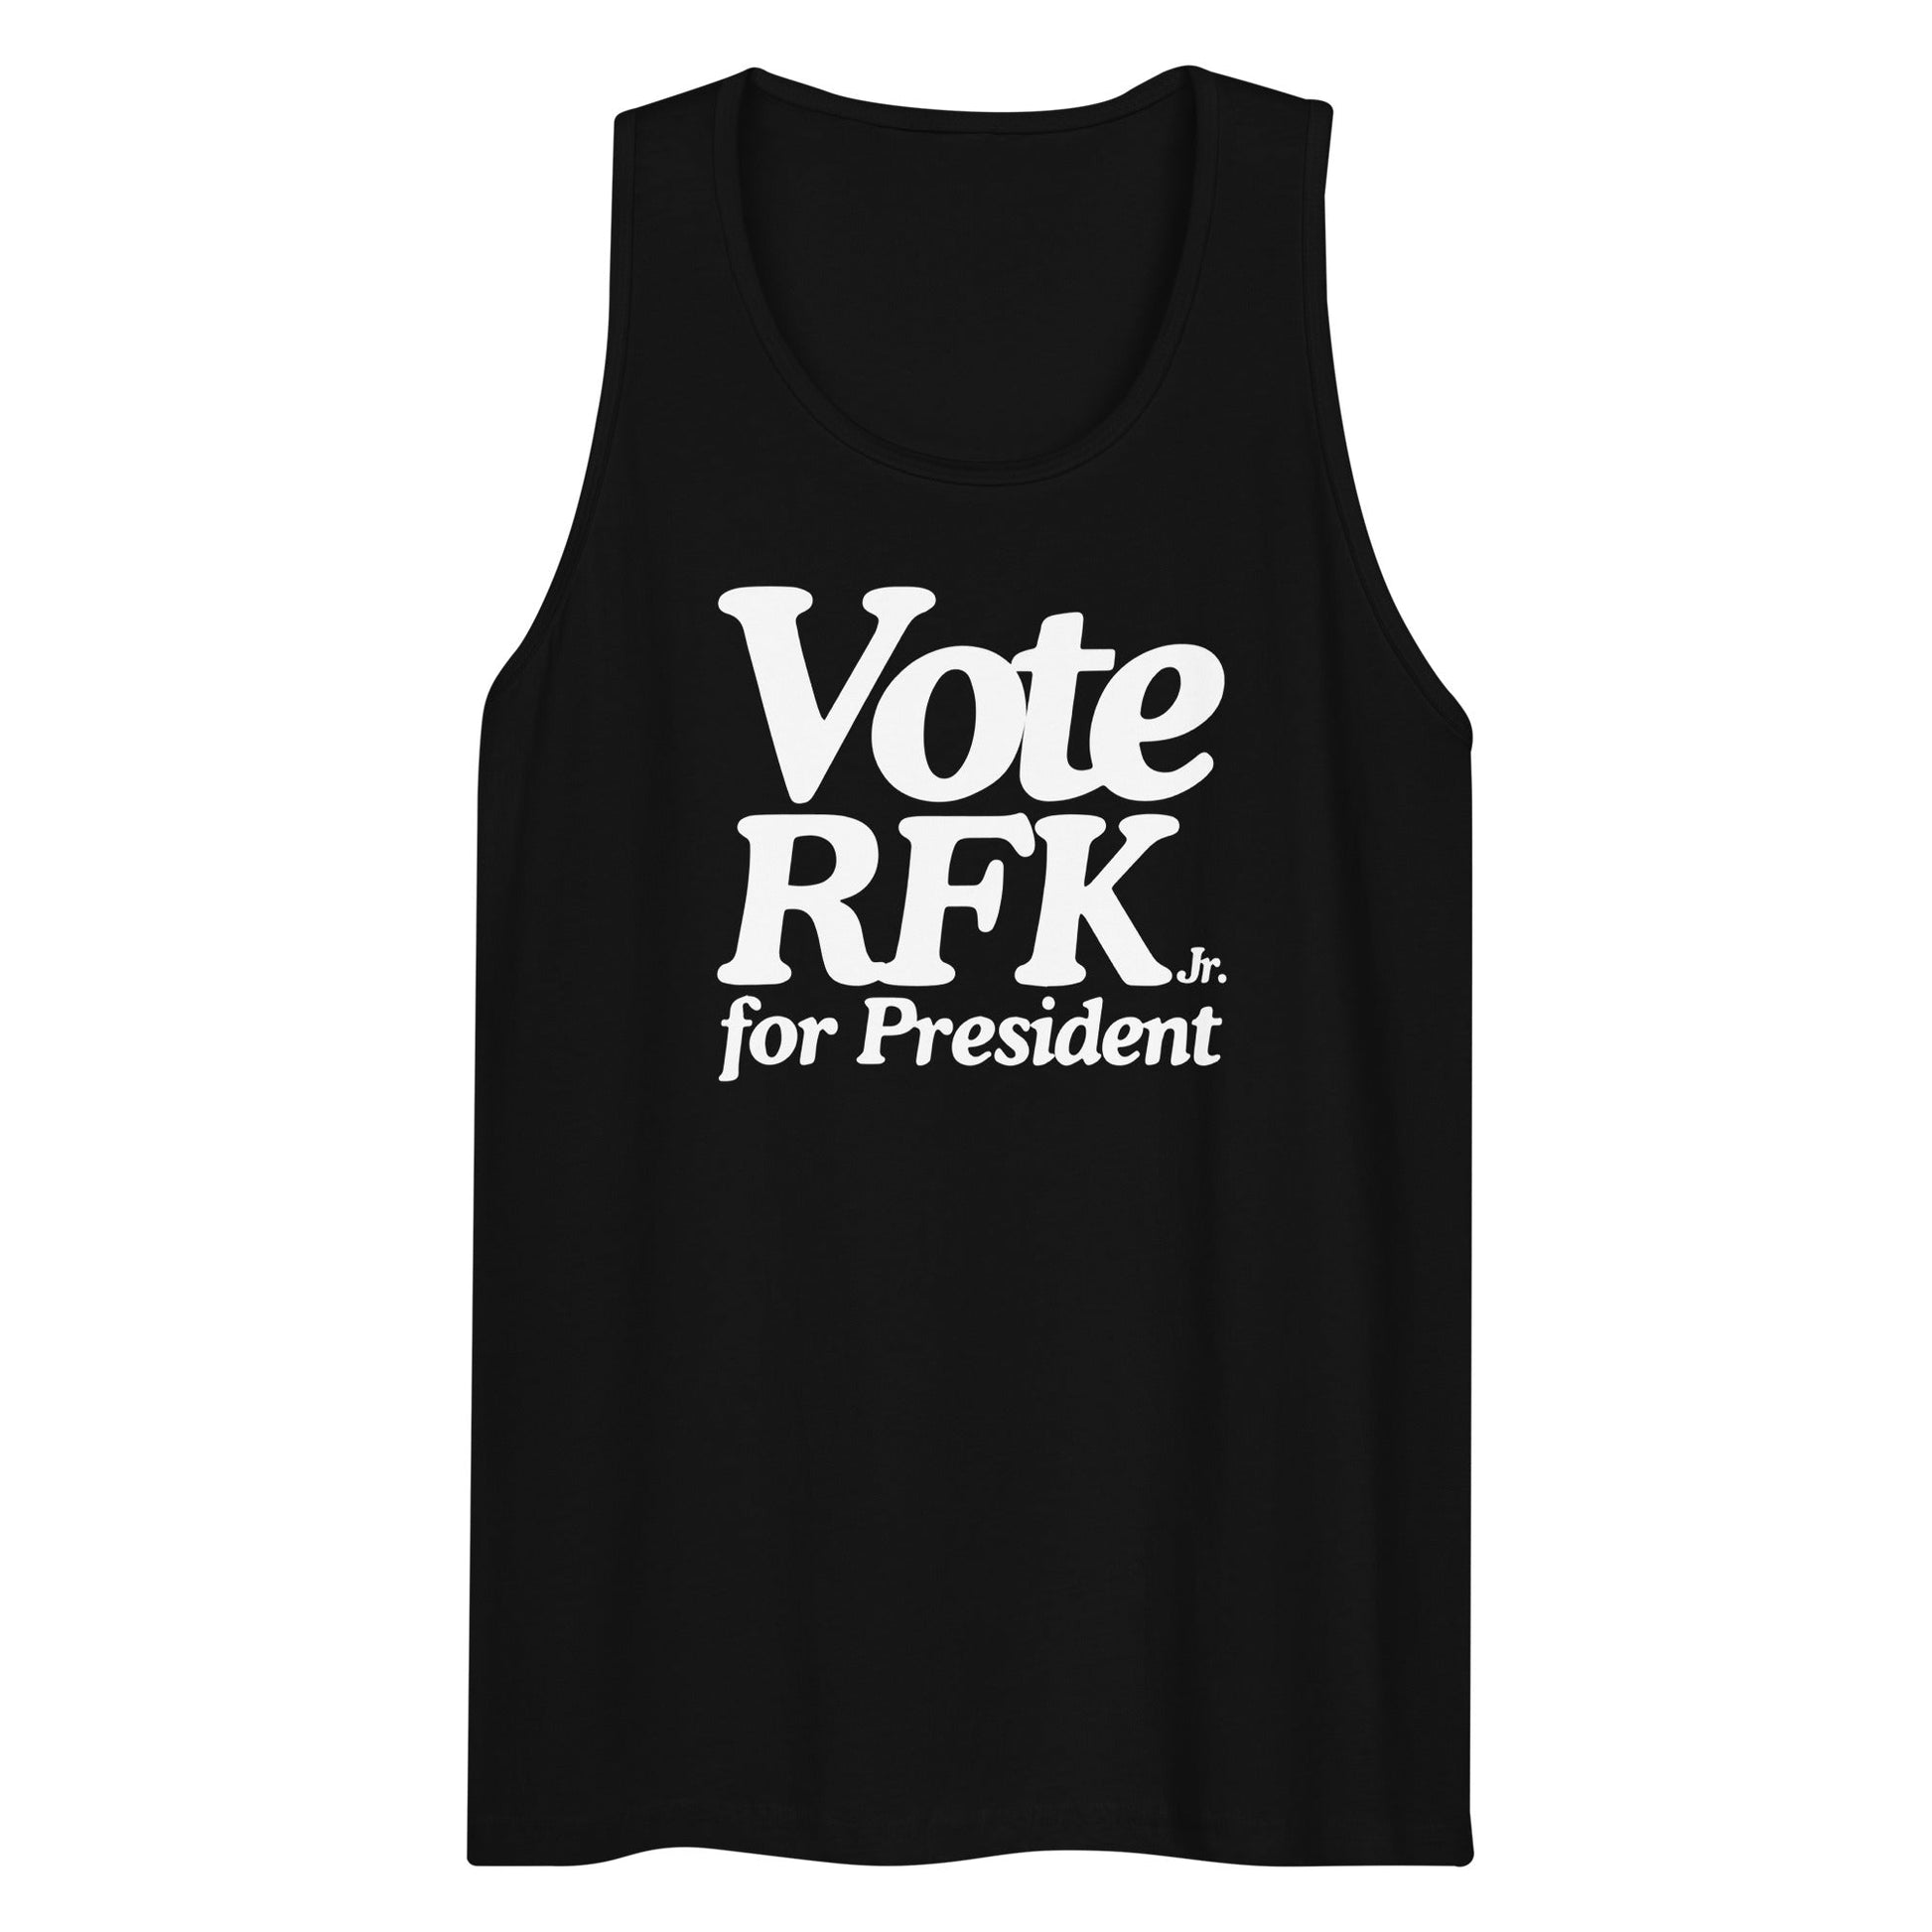 Vote RFK Jr. Men’s Tank Top - TEAM KENNEDY. All rights reserved